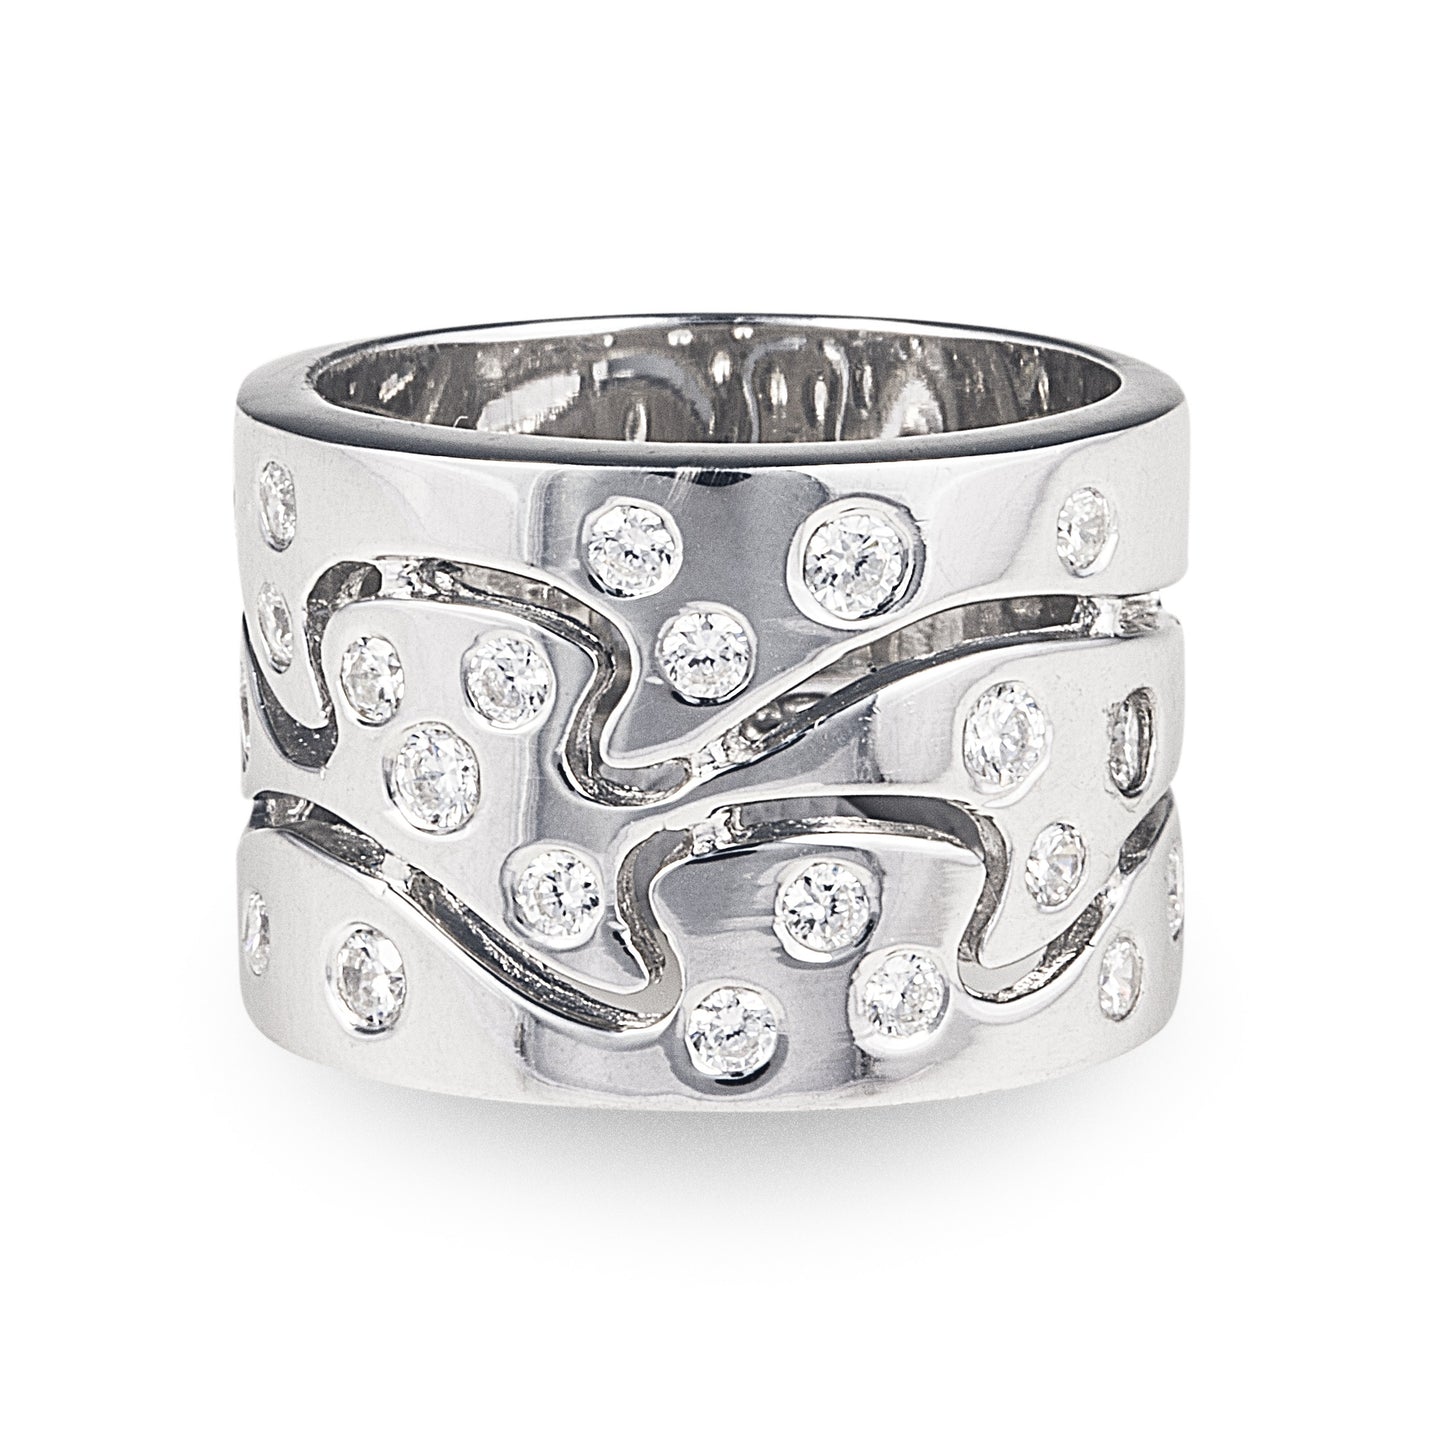 This incredible 925 sterling silver Puzzle Ring features a cut-out wave to give the illusion of a jigsaw puzzle. Worldwide shipping.